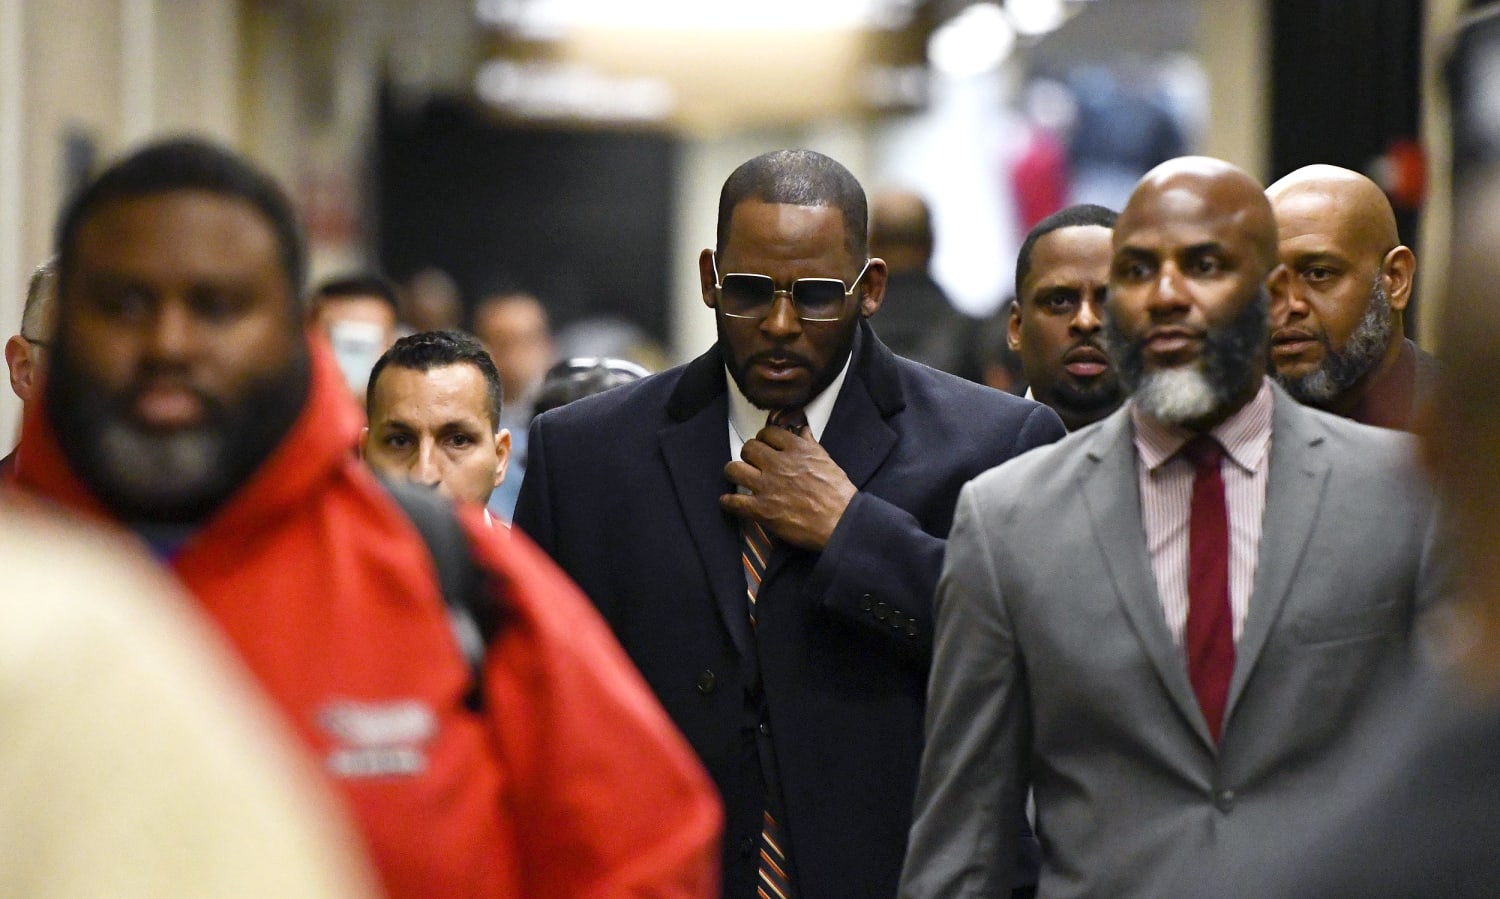 R. Kelly charged 11 counts of sexual assault and abuse